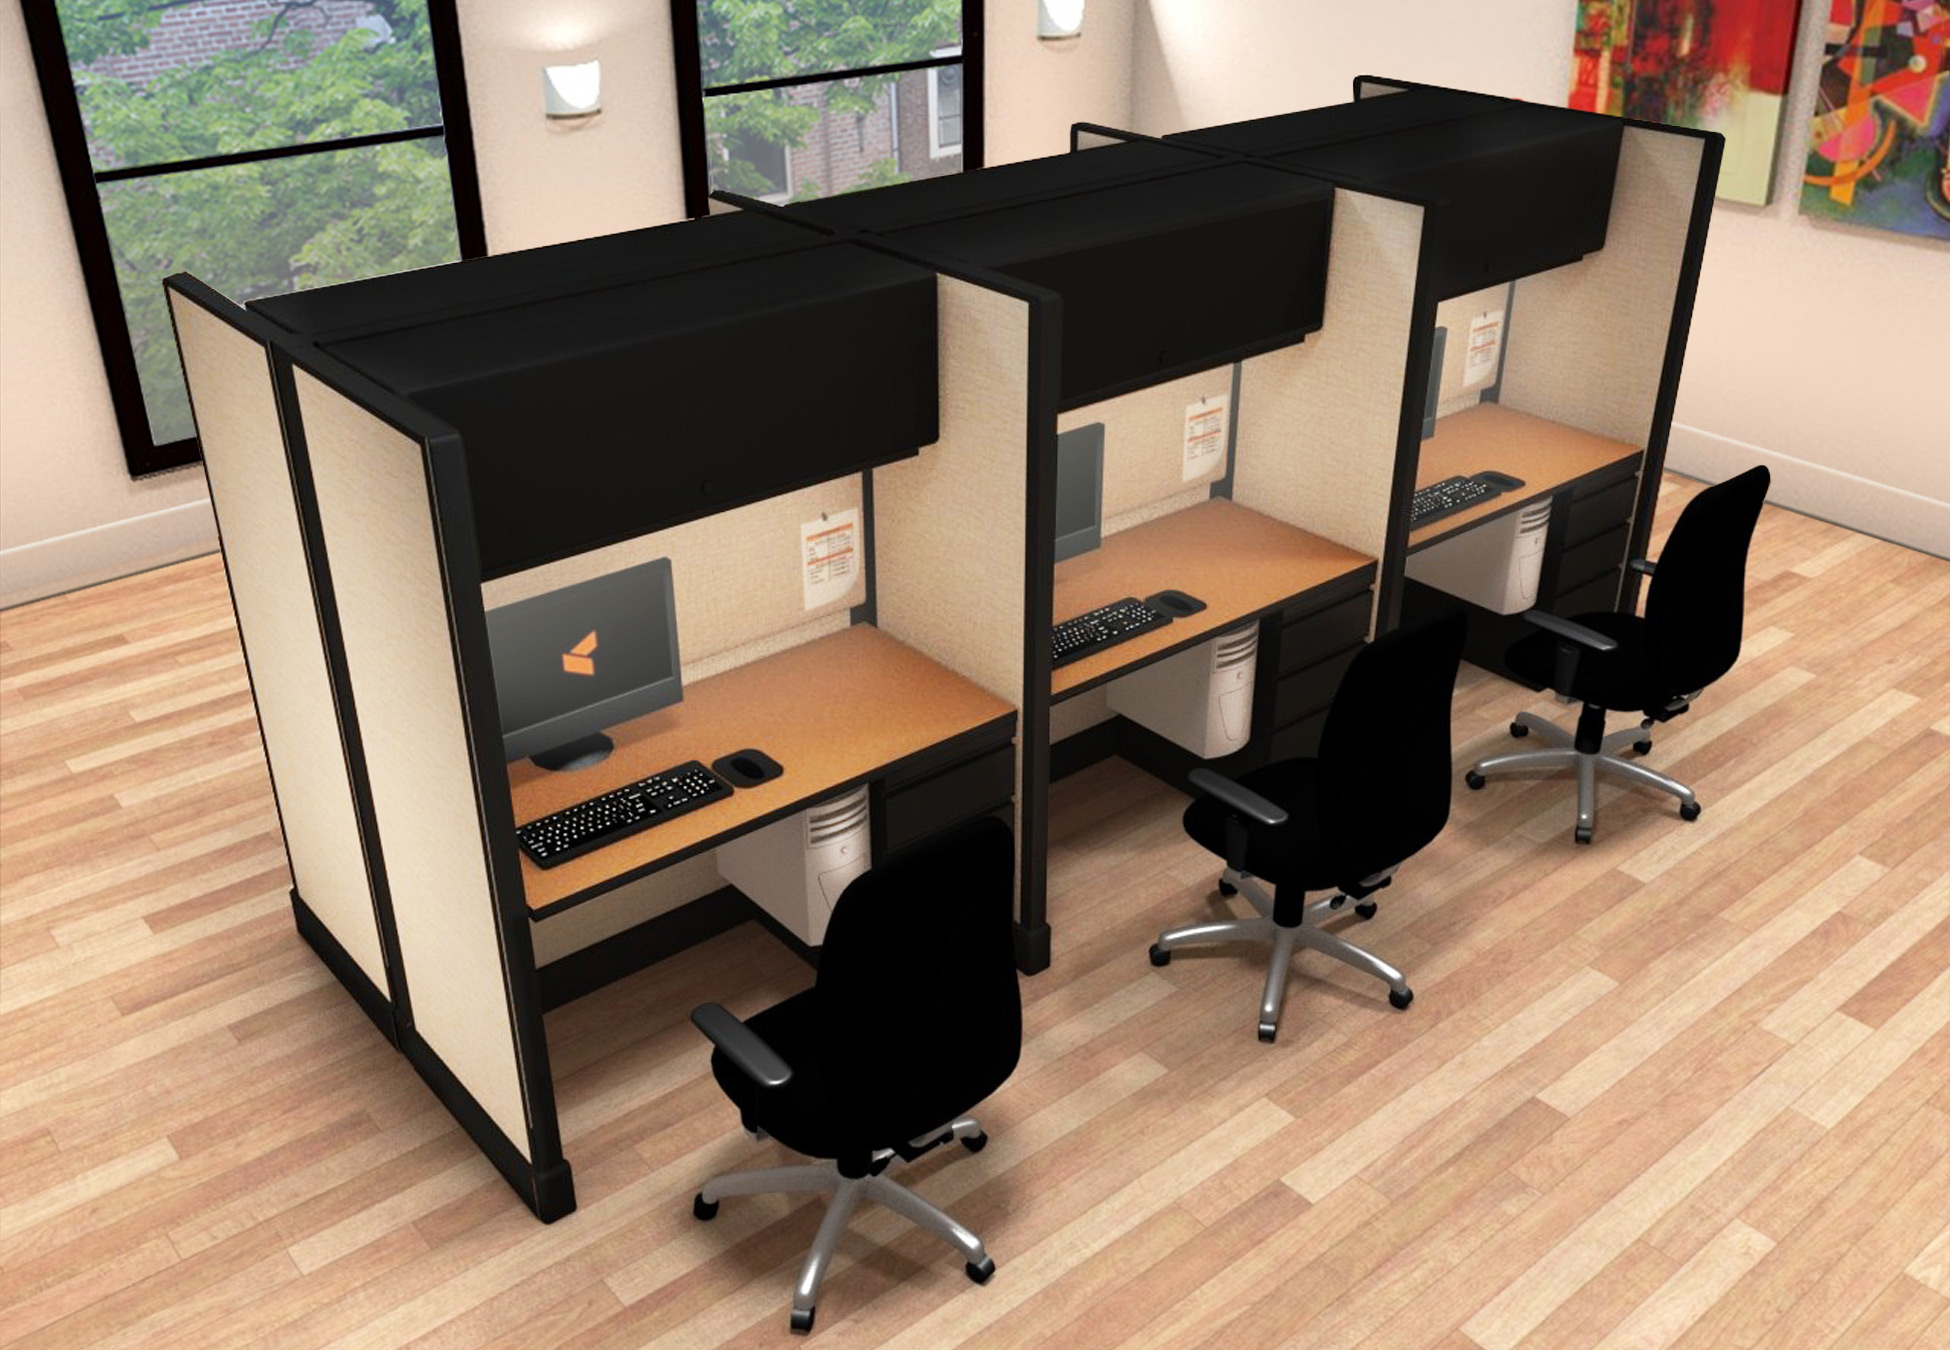 2x4 Small Business Furniture - 6 Pack Cluster